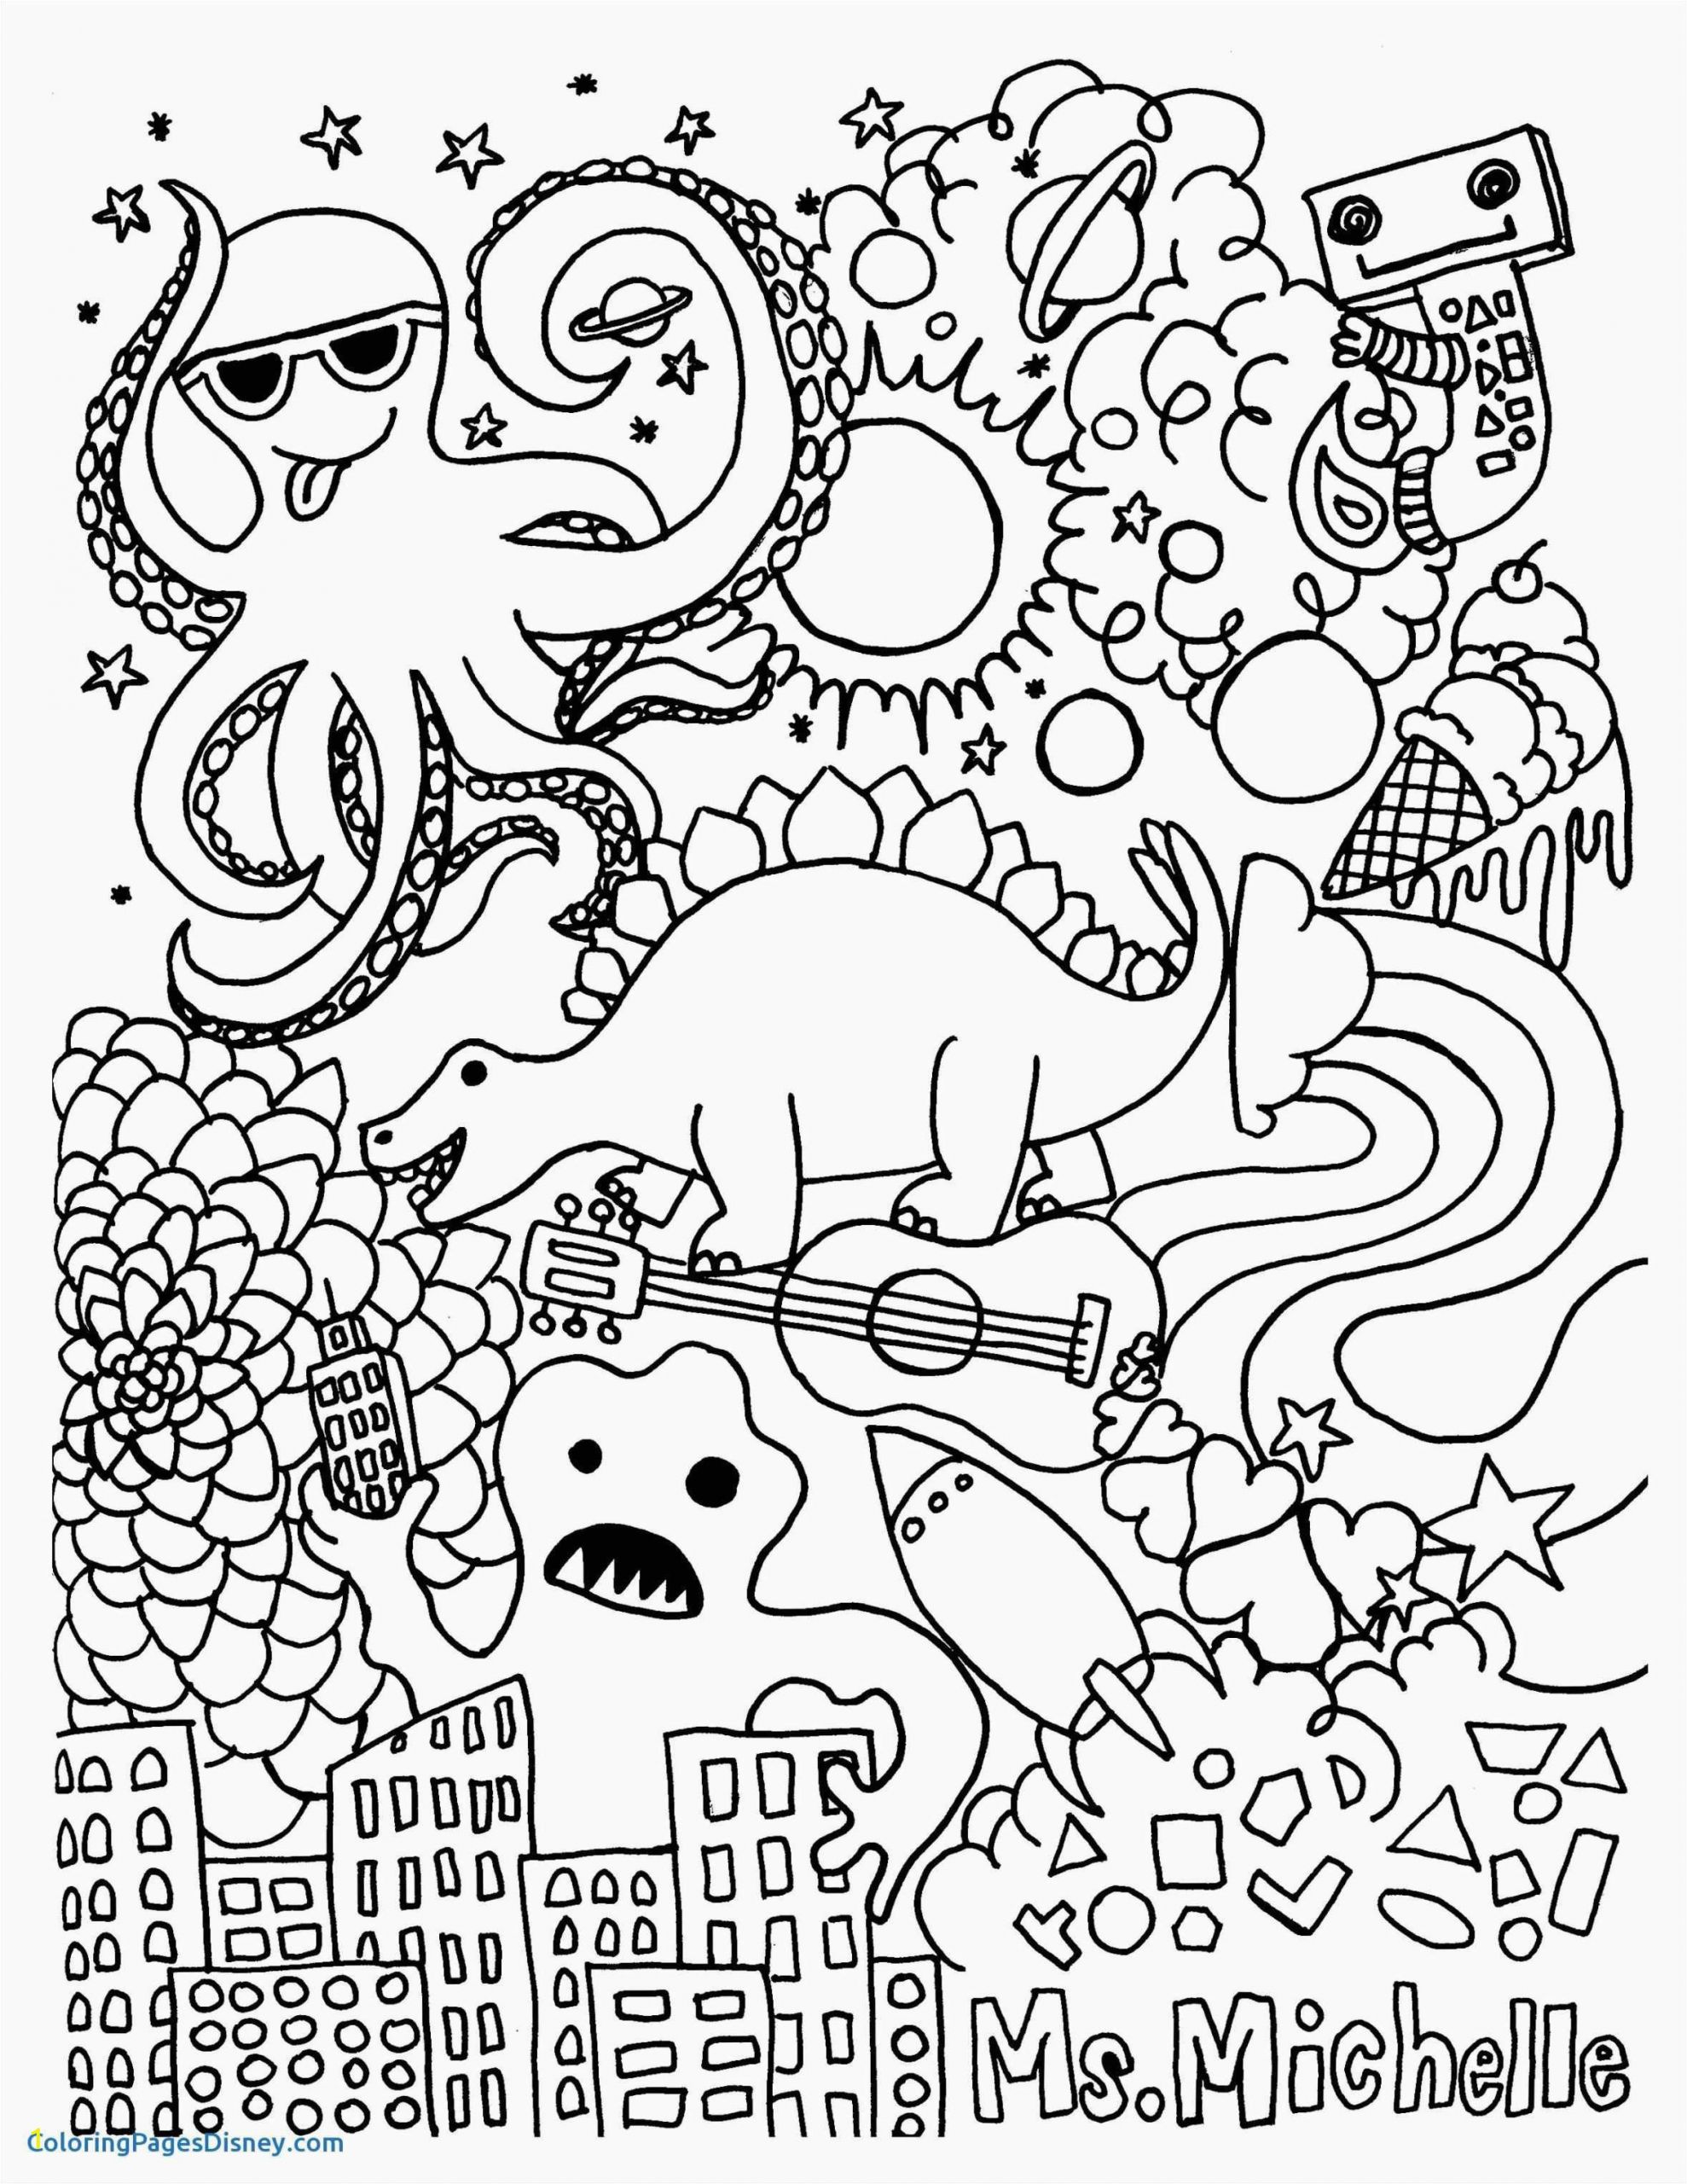 Coloring Pages with Quotes Printable Tumblr Coloring Pages Twenty E Pilots Coloring Pages